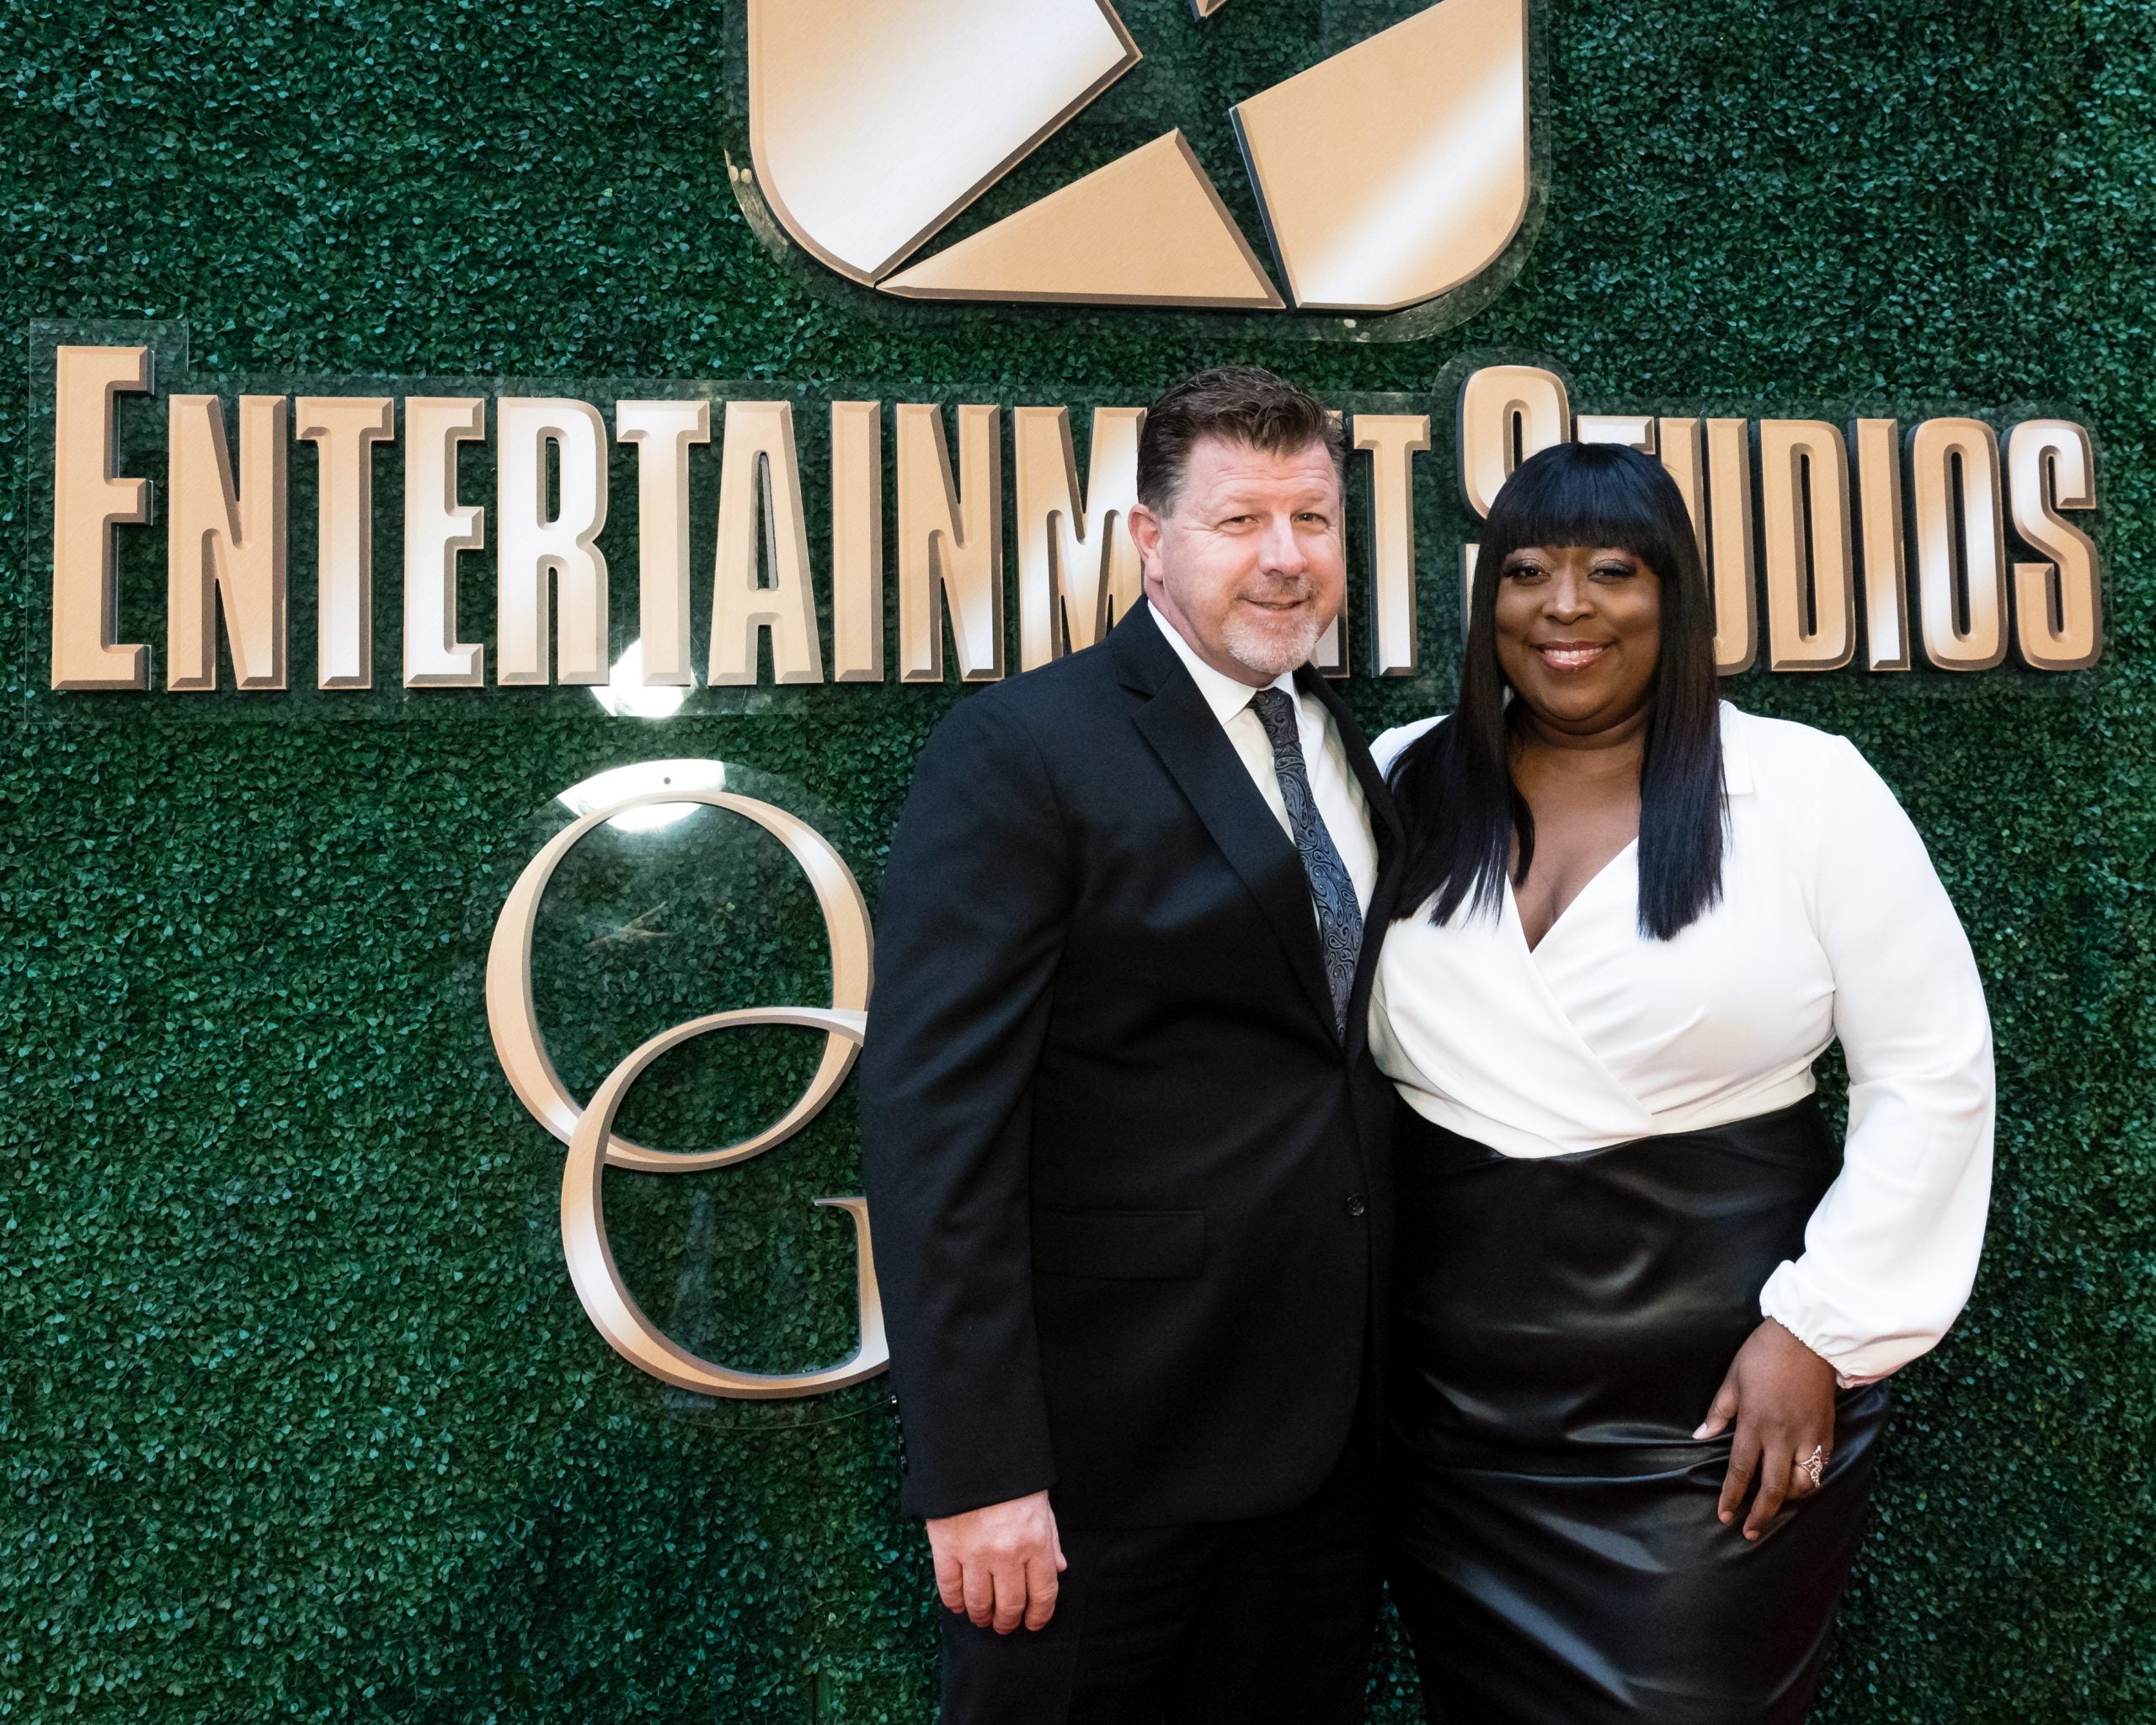 Loni Love Met Her Boyfriend Through Christian Mingle But Says They’re Not Christians: ‘I Wanted To Meet A Nice Man’